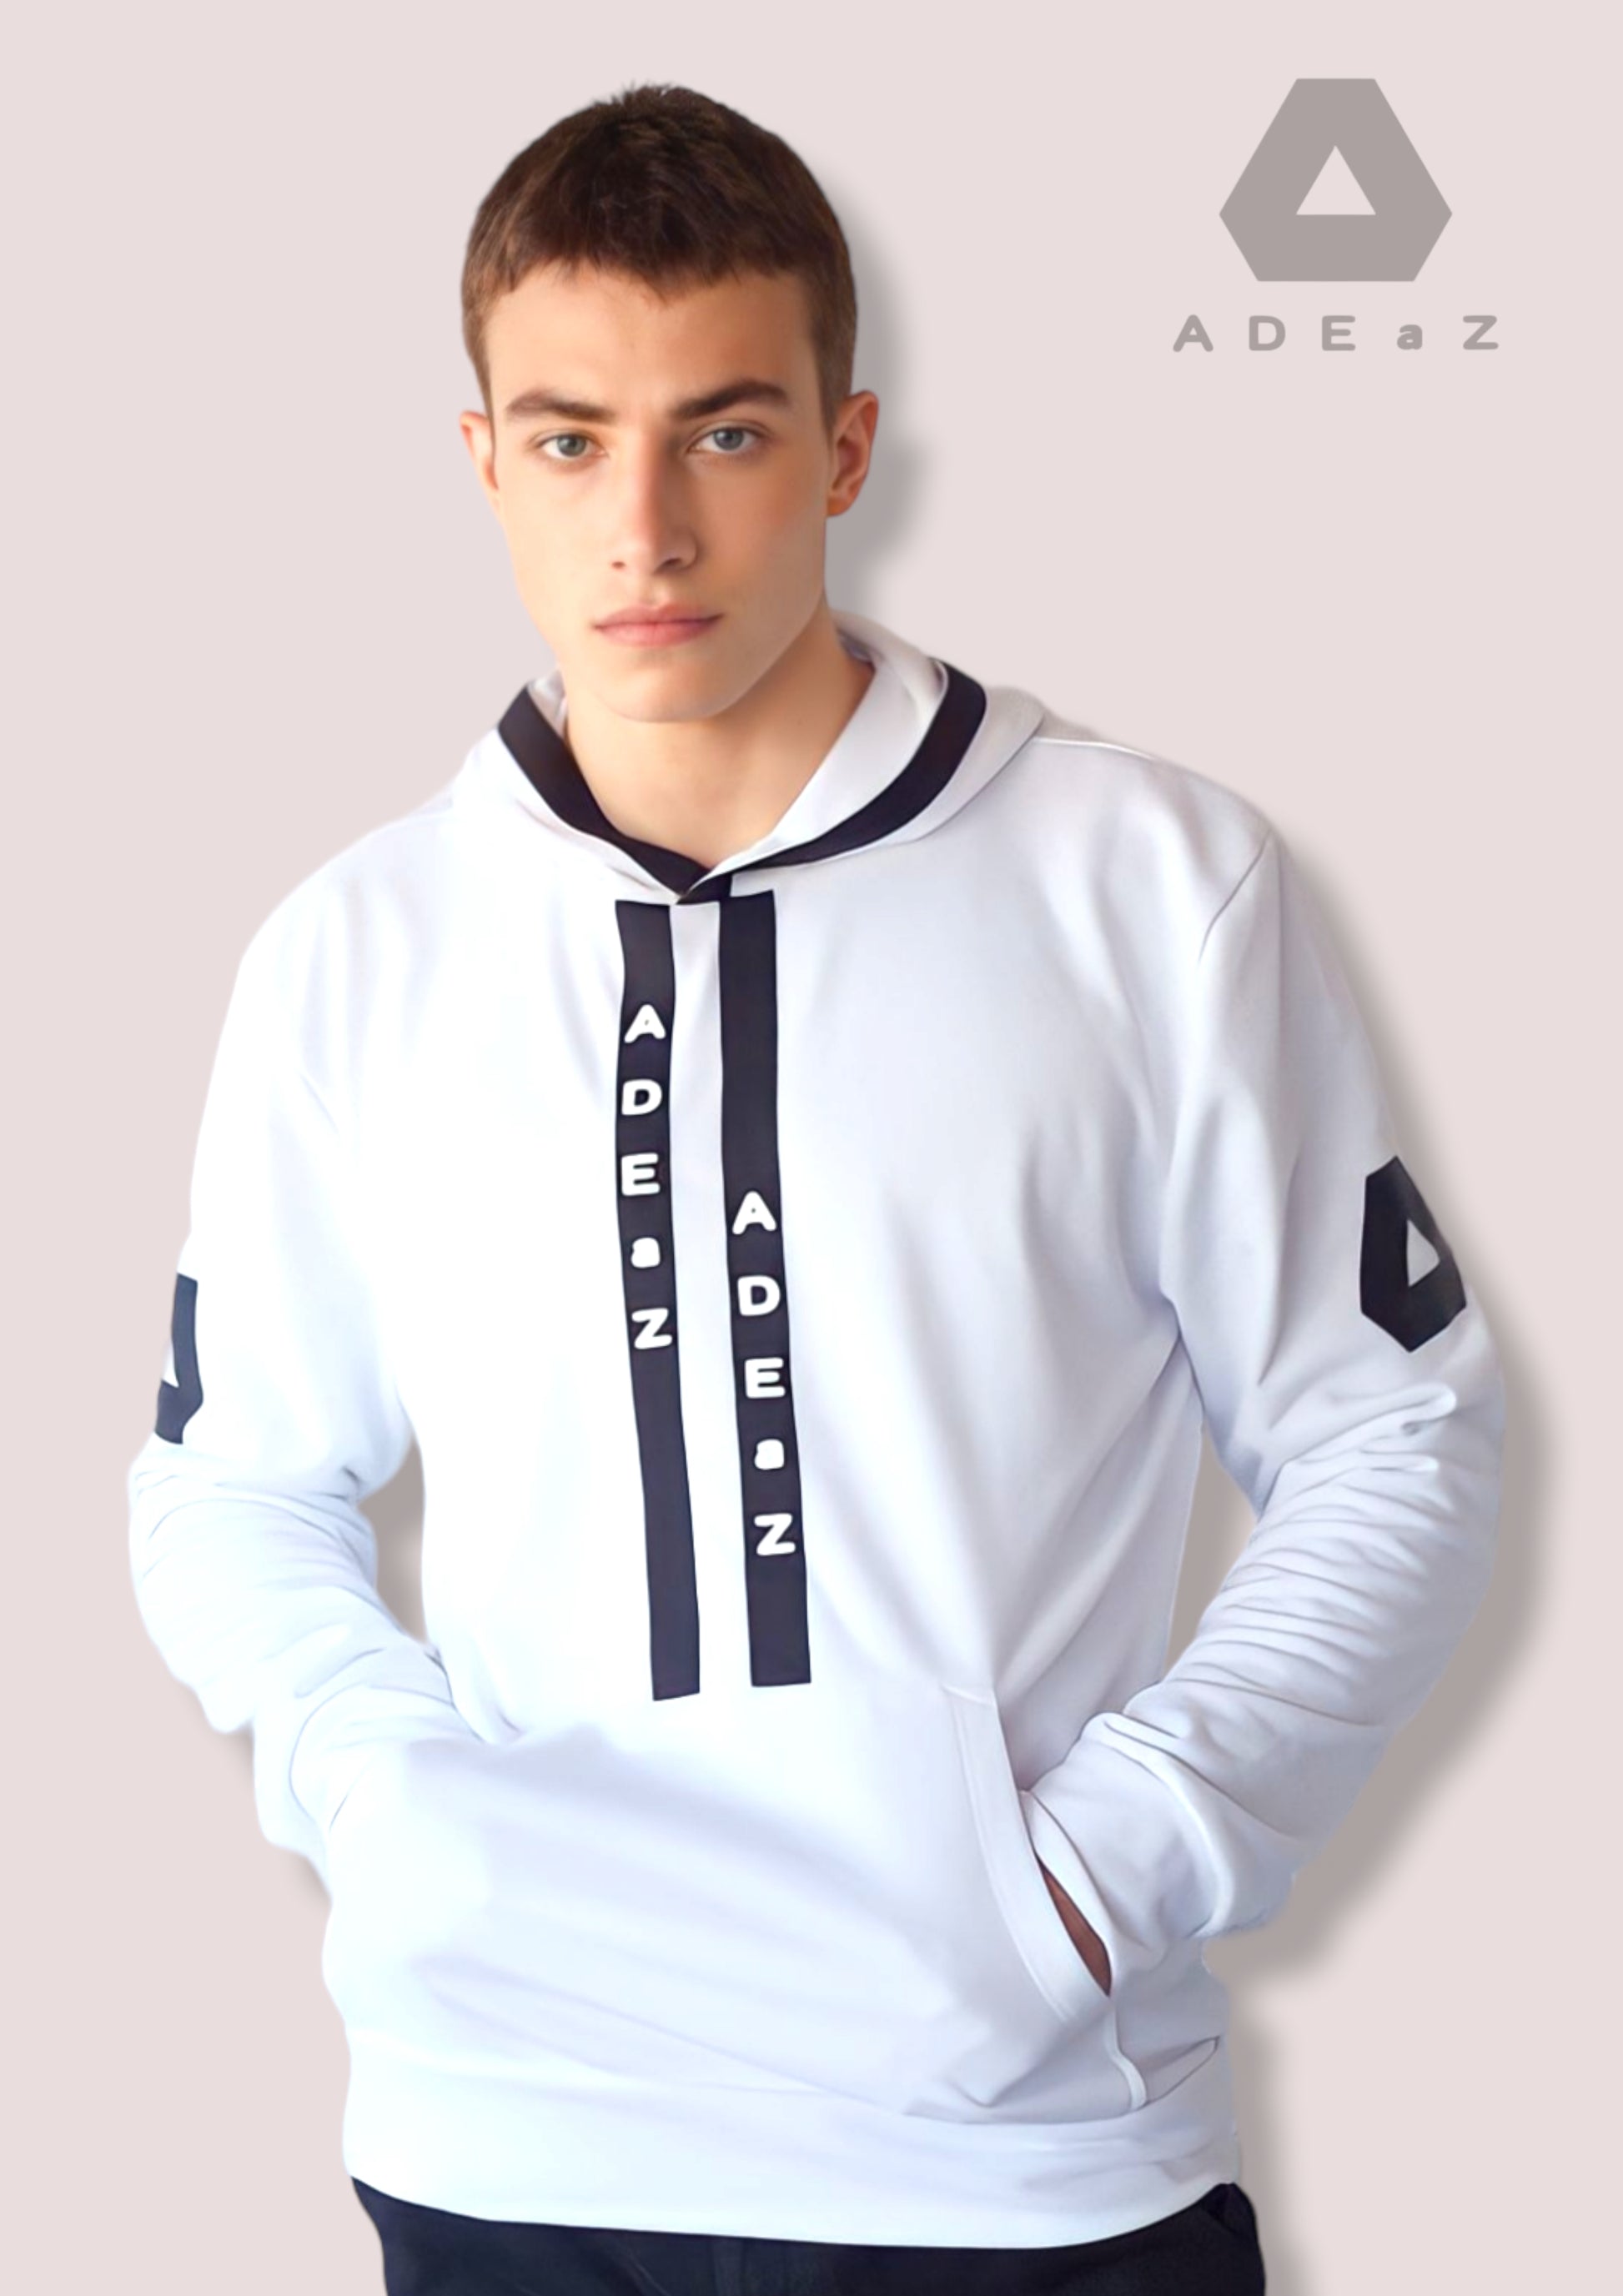 "Men's Fashion Hoodie with Stripe: Trendy hoodie for men with a fashionable stripe accent."